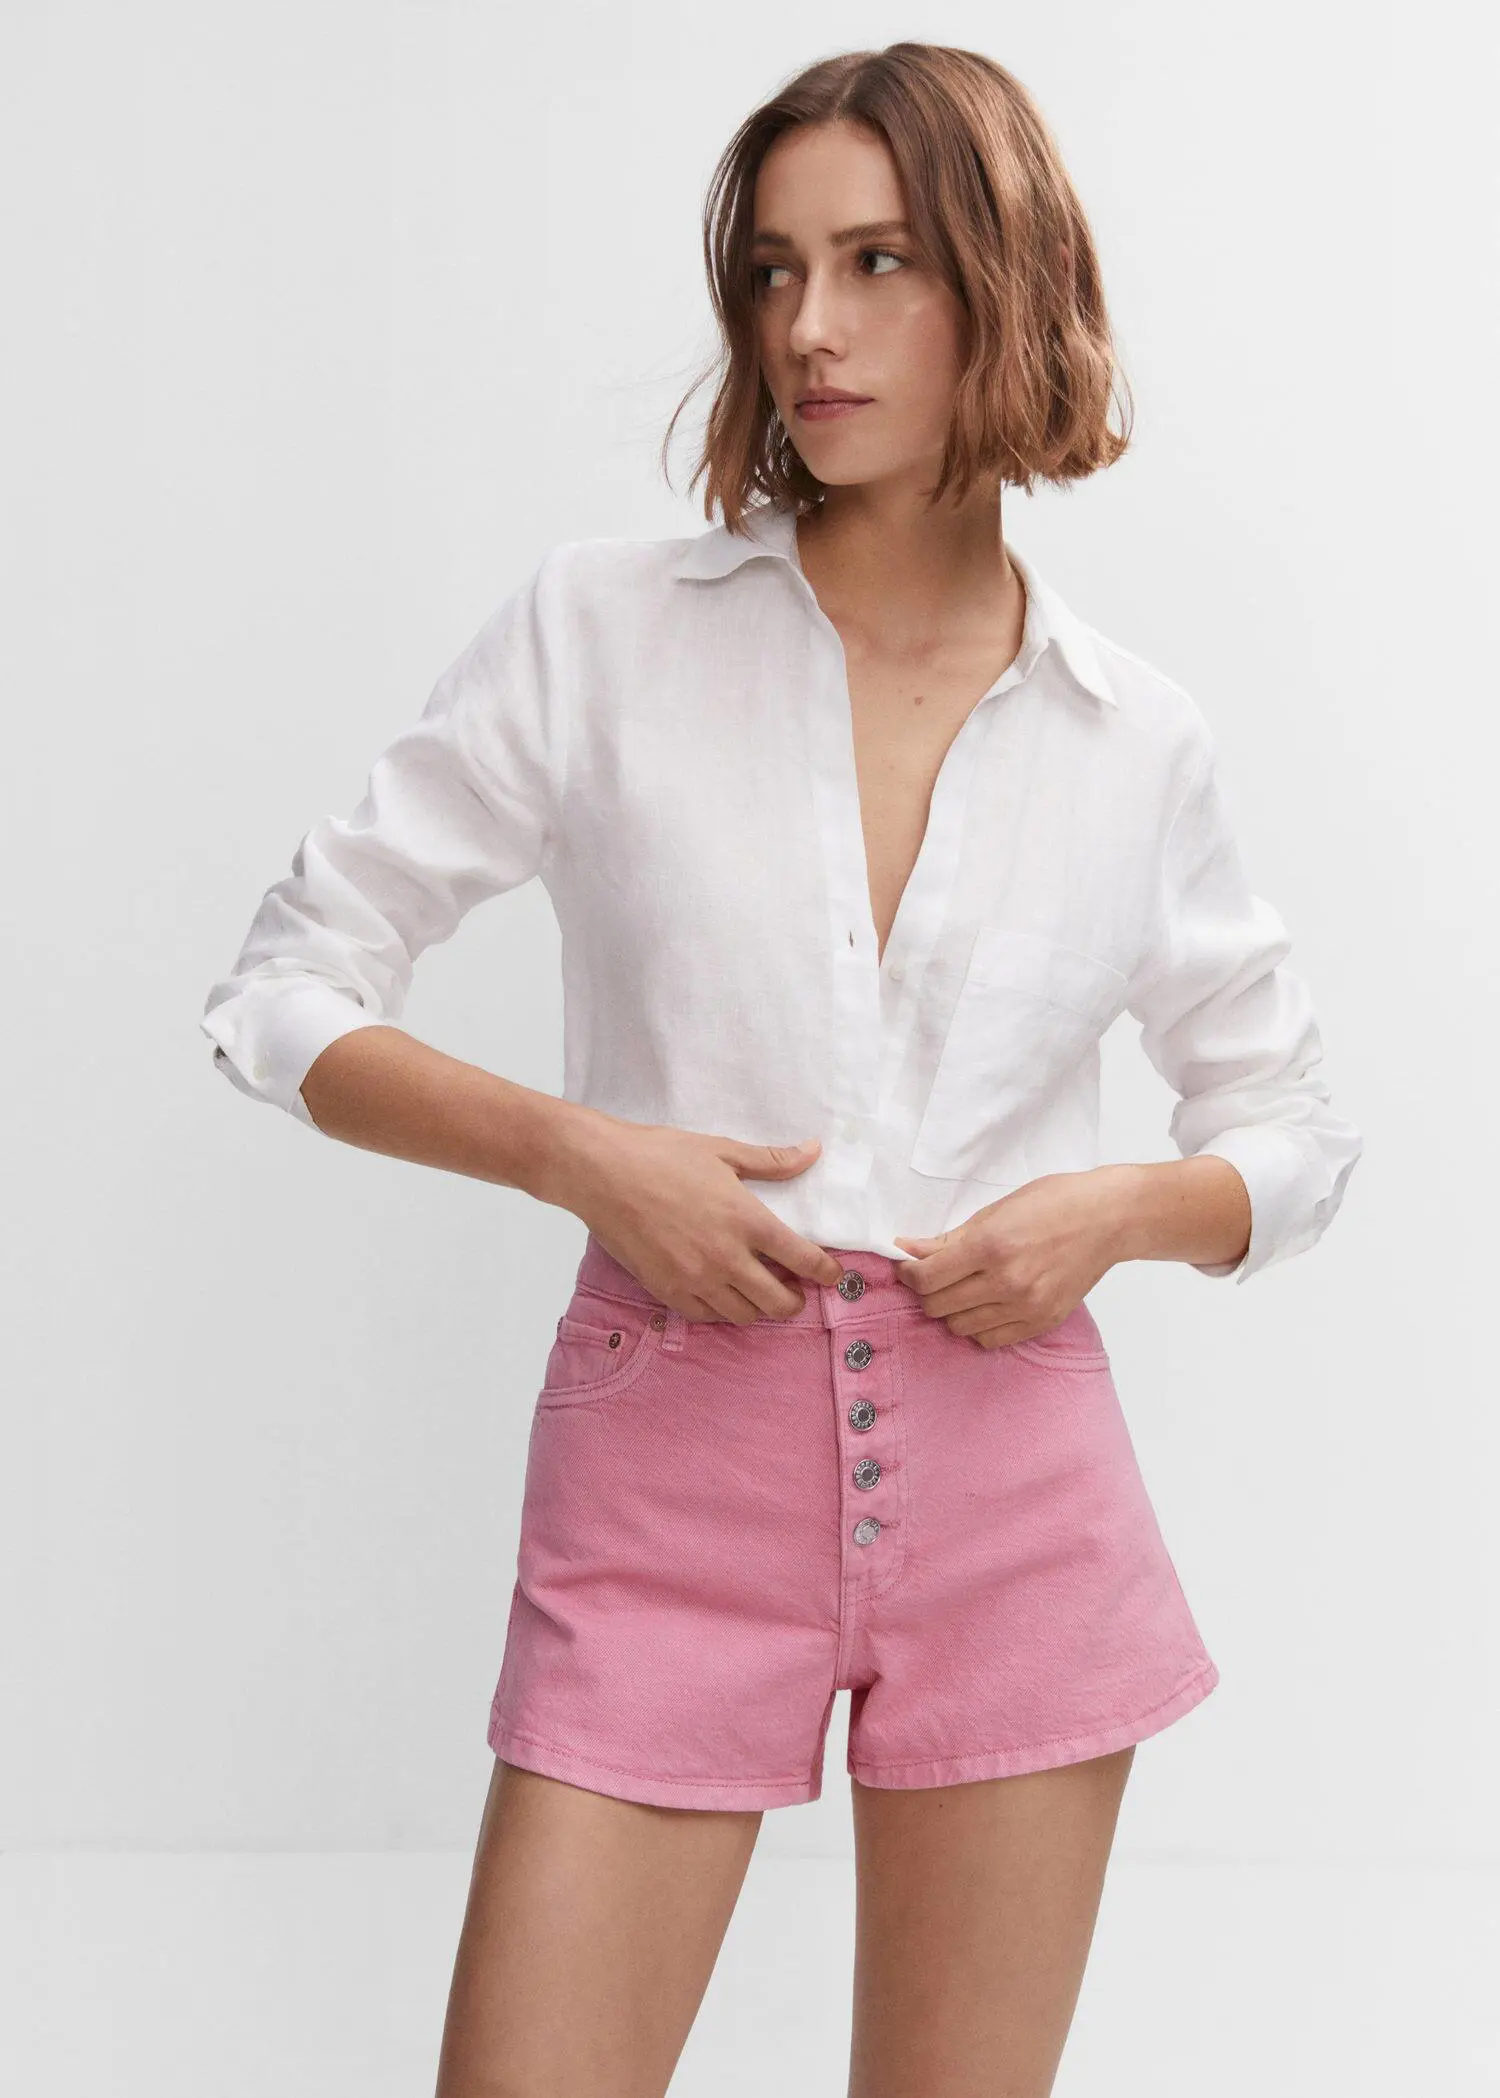 Mango Denim shorts with buttons. a woman in white shirt and pink shorts. 